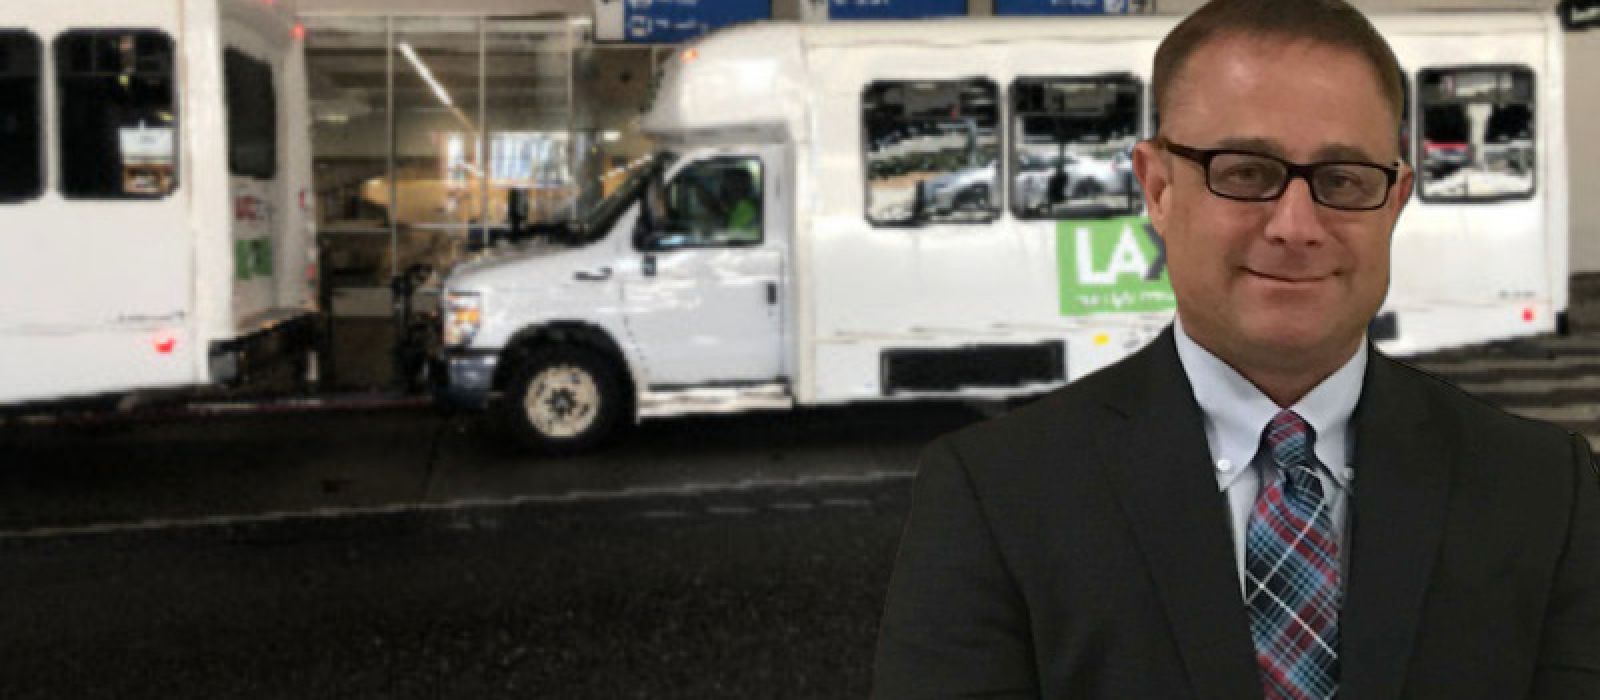 LAX Shuttle Bus Accident-Injury Lawyer